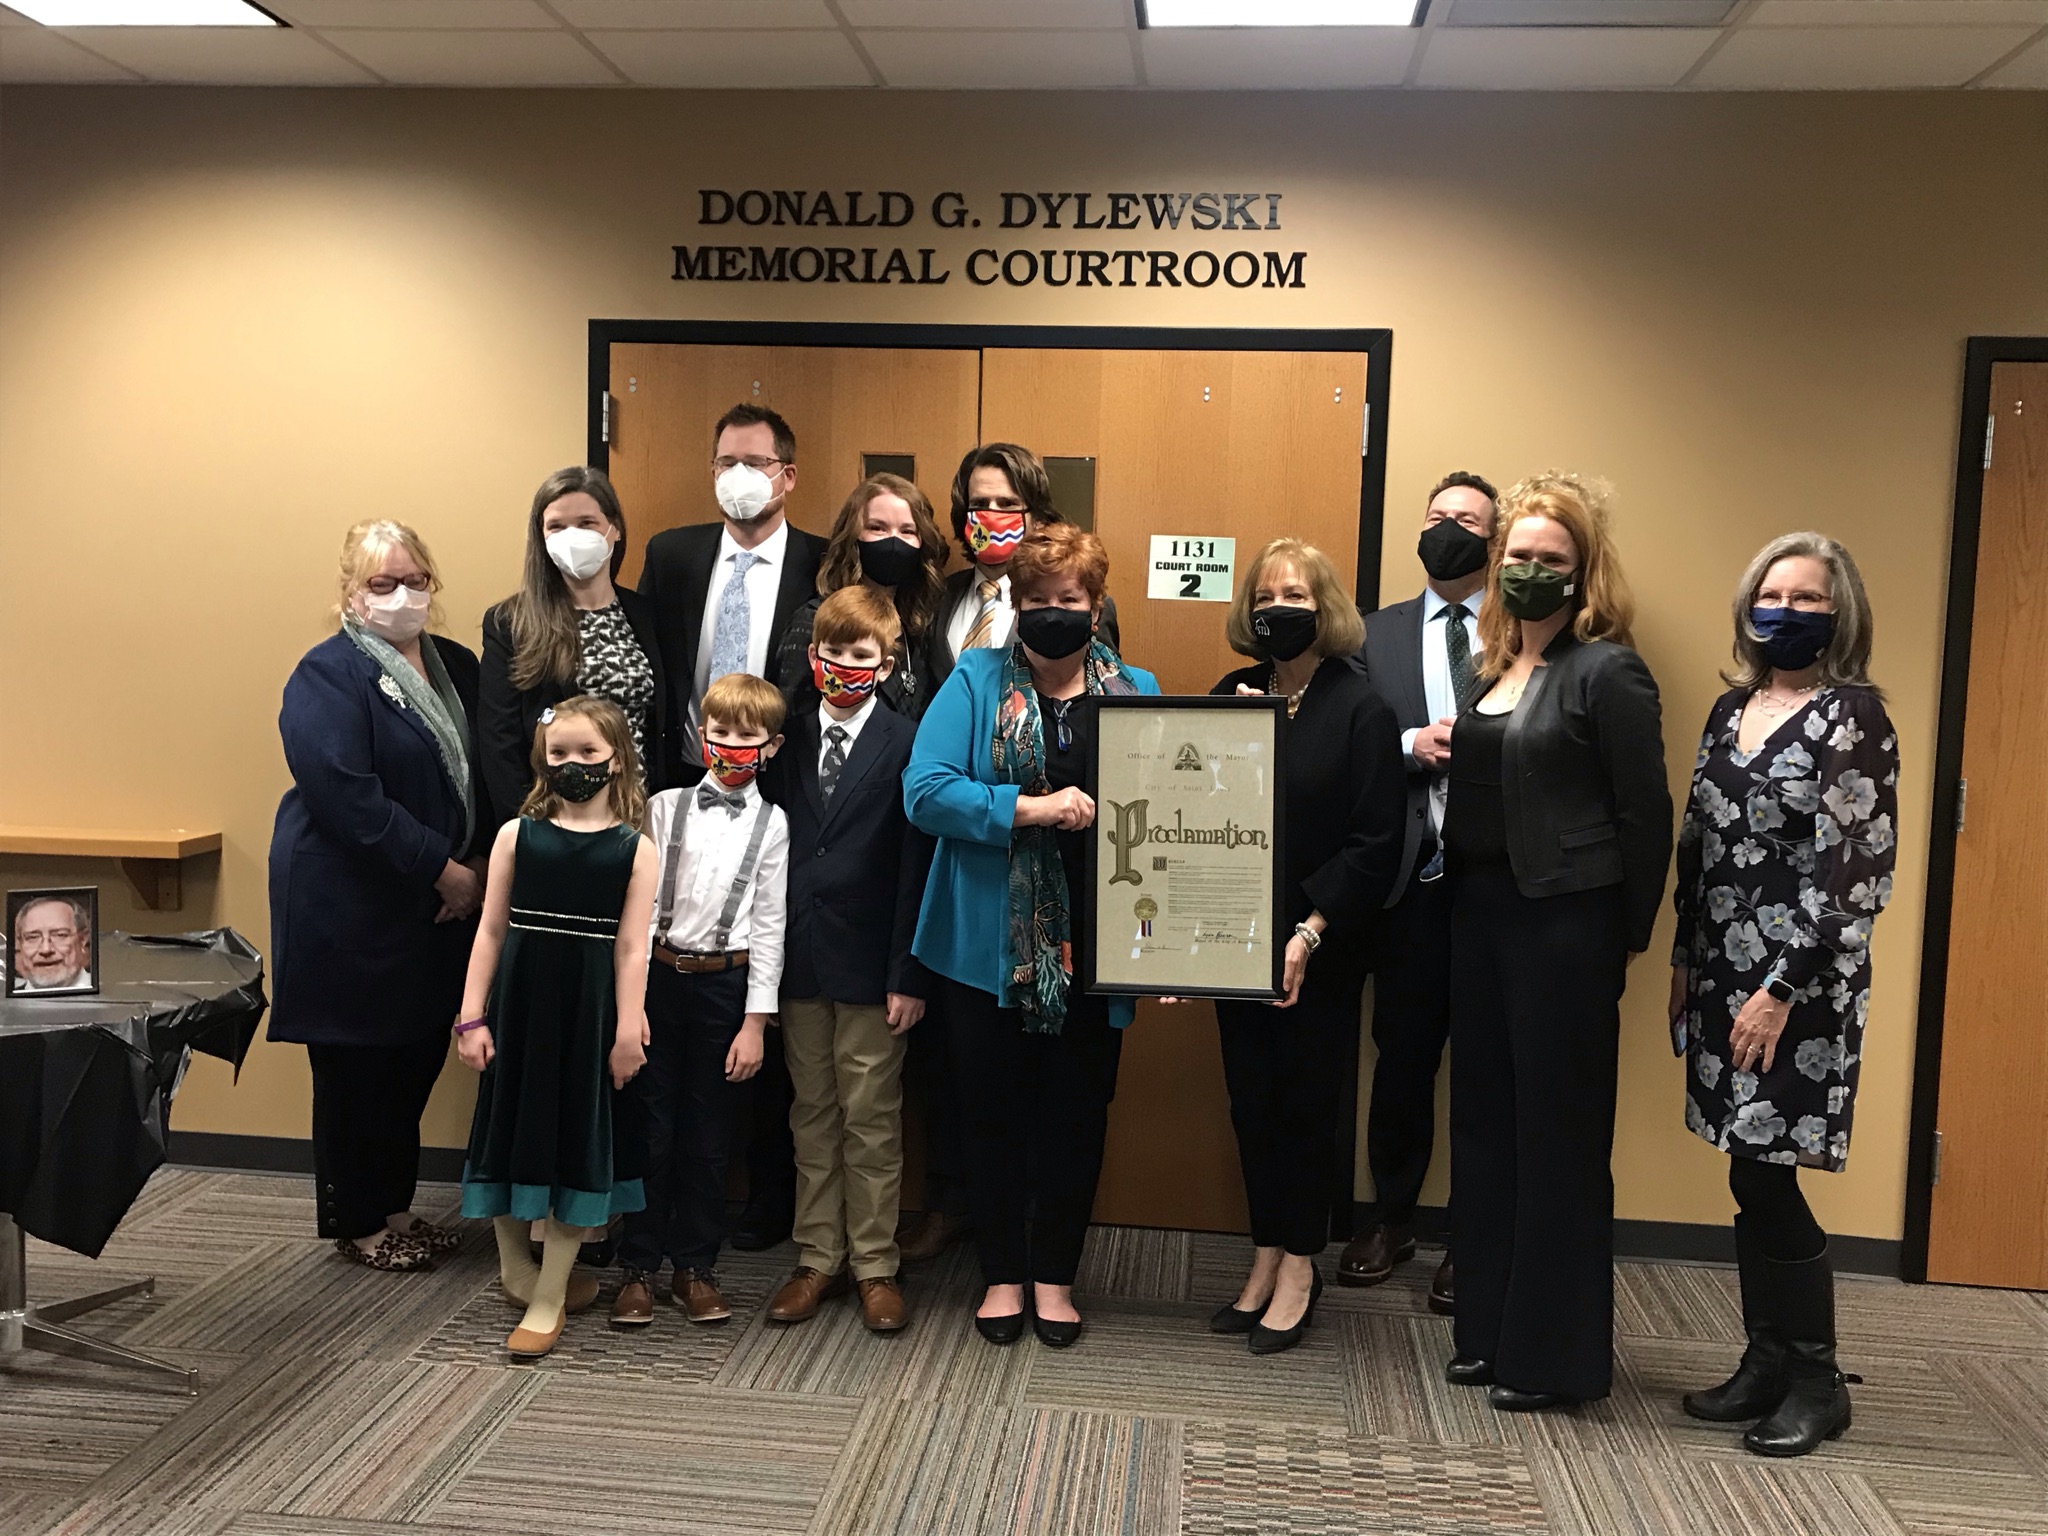 The Dylewski Family gathers on March 19, 2021 in the Donald G. Dylewski Courtroom